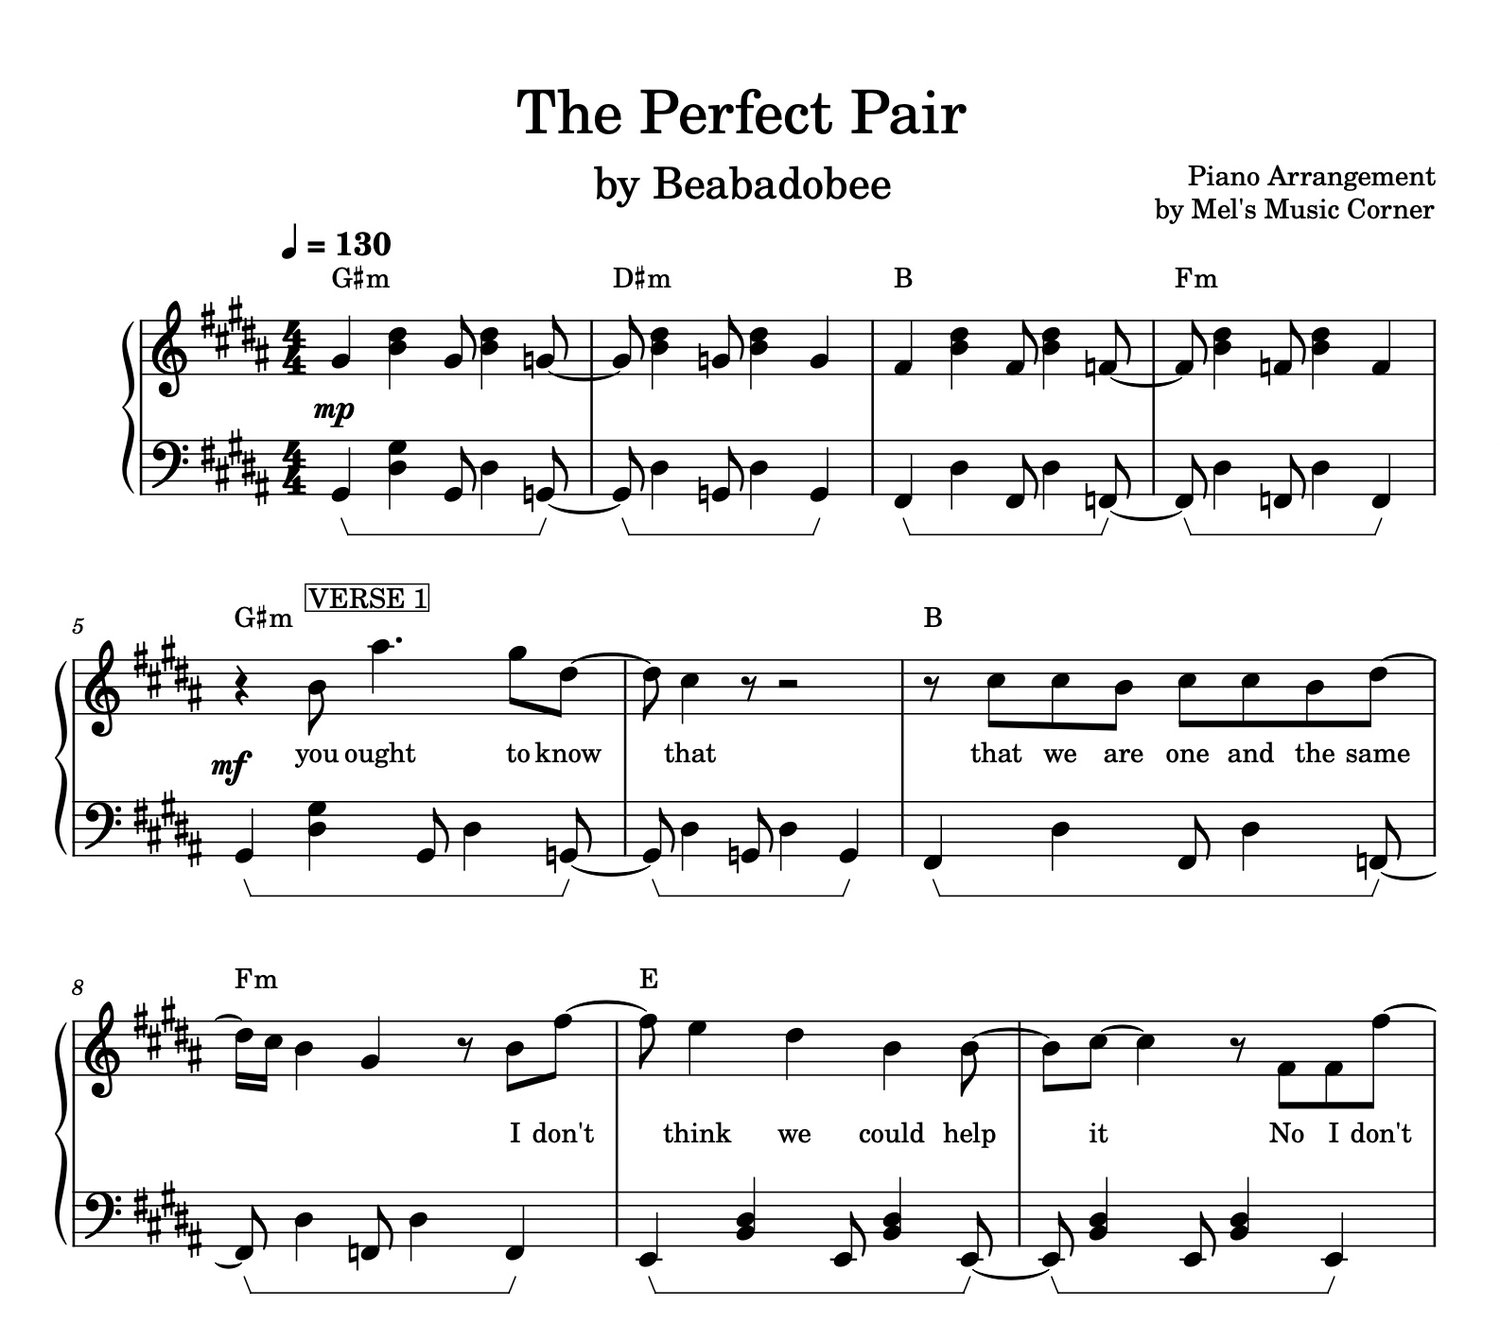 The Perfect Pair by Beabadoobee SHEET MUSIC or MIDI